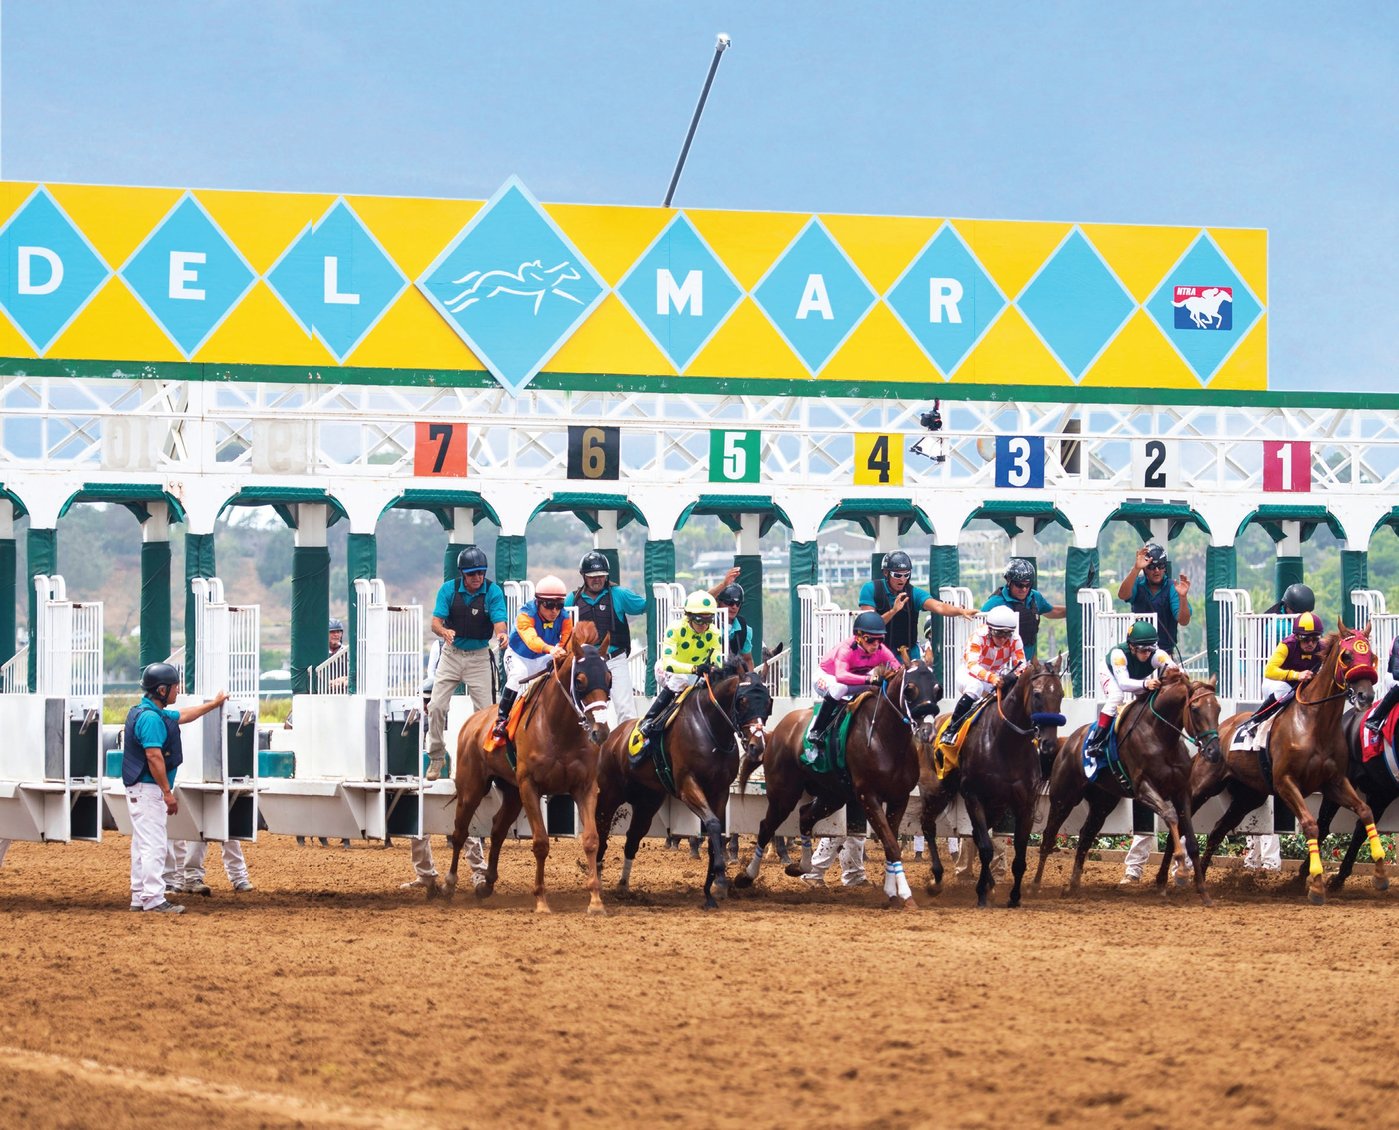 Jockeys will descend upon Del Mar for its two biggest events of the season—the Pacific Classic and the Breeders’ Cup PHOTO COURTESY OF DEL MAR THOROUGHBRED CLUB